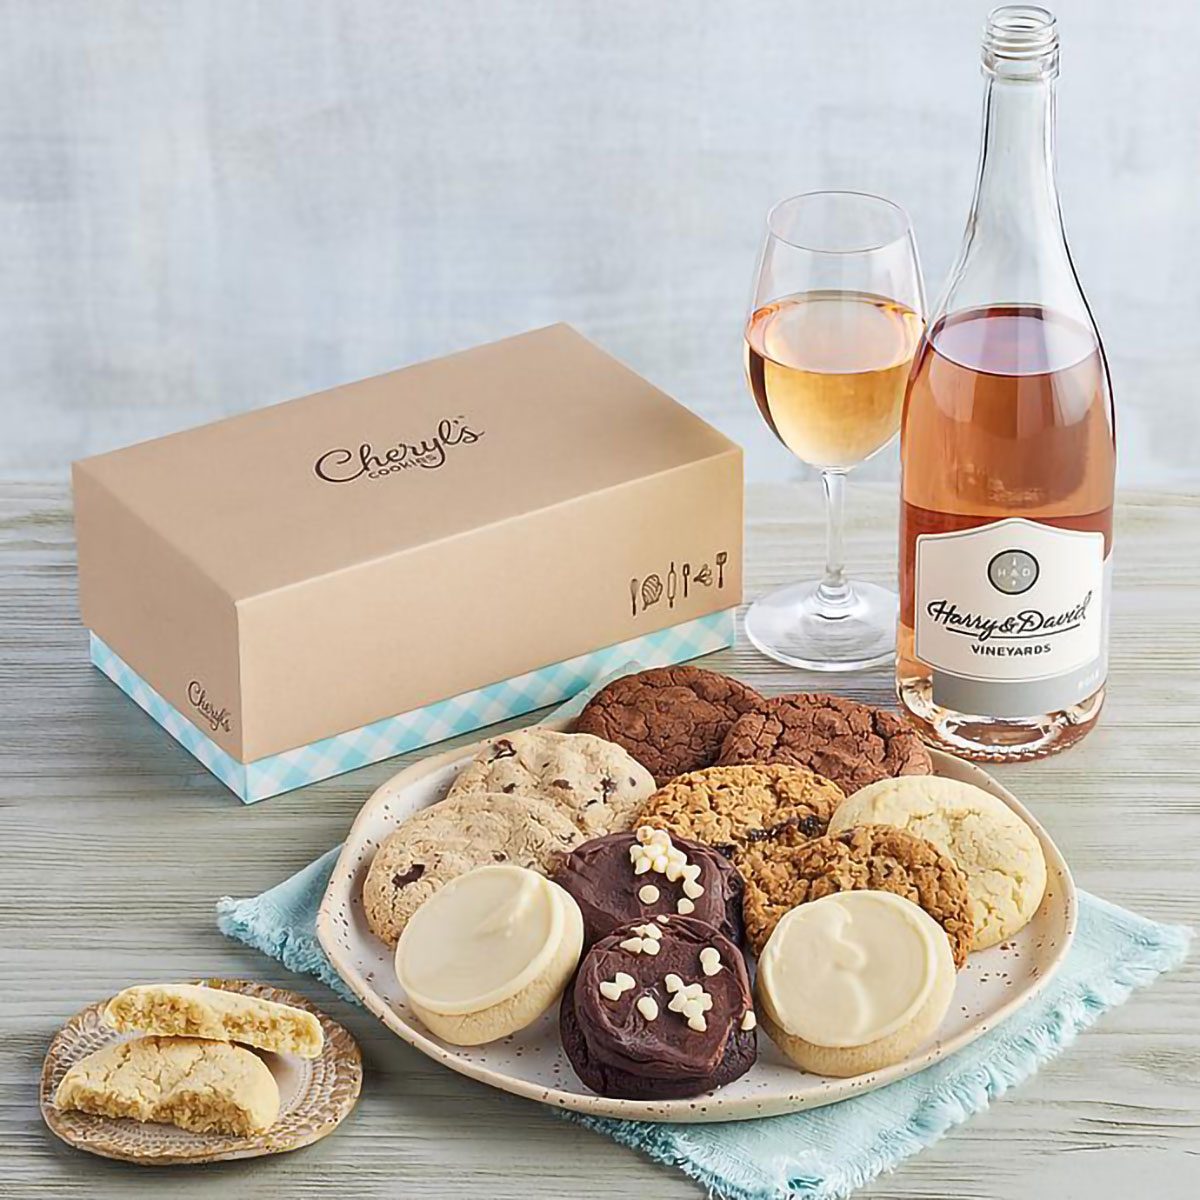 Rose And Cheryls Cookies Gift Box